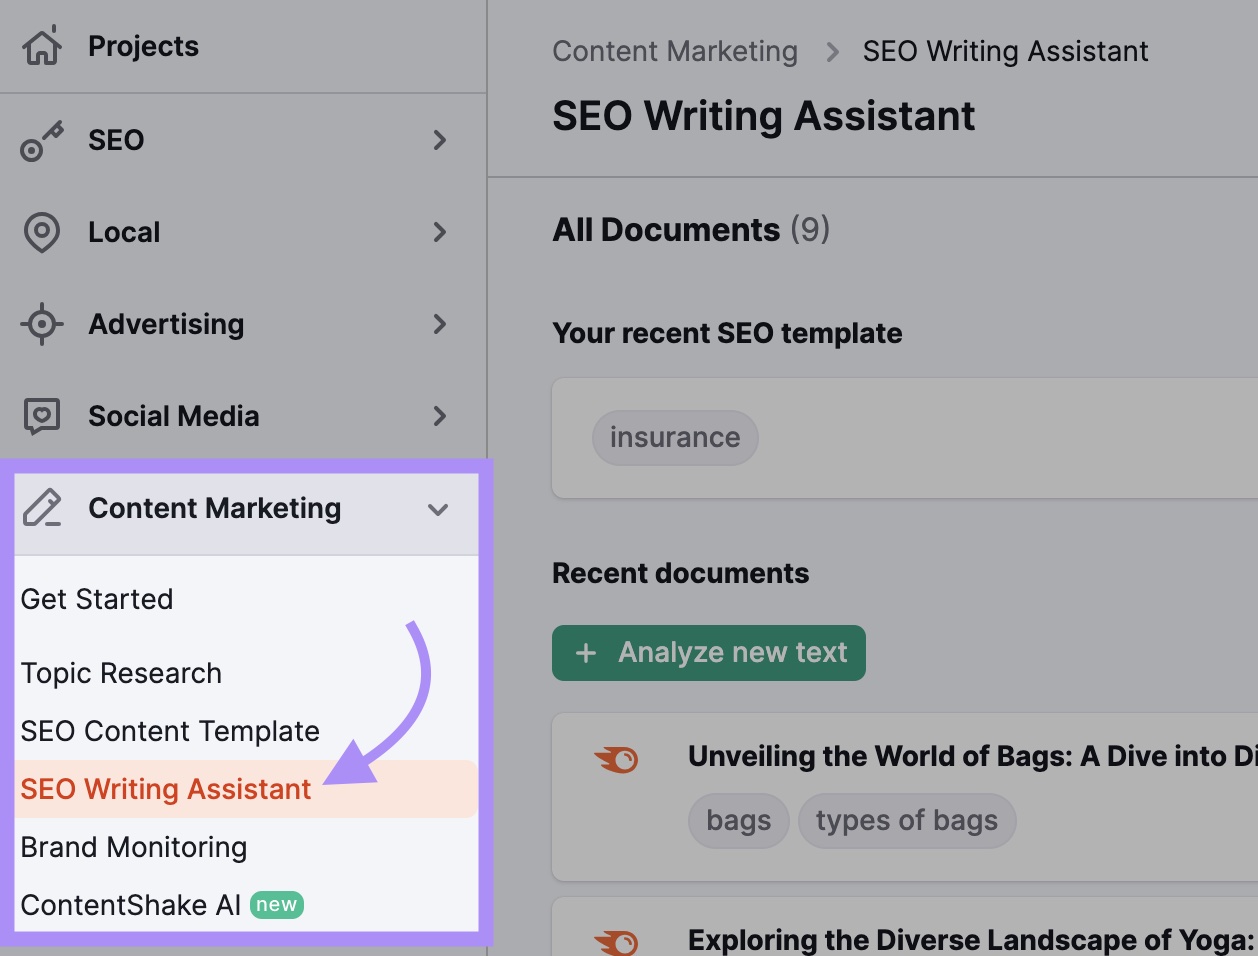 Navigating to “SEO Writing Assistant” in Semrush